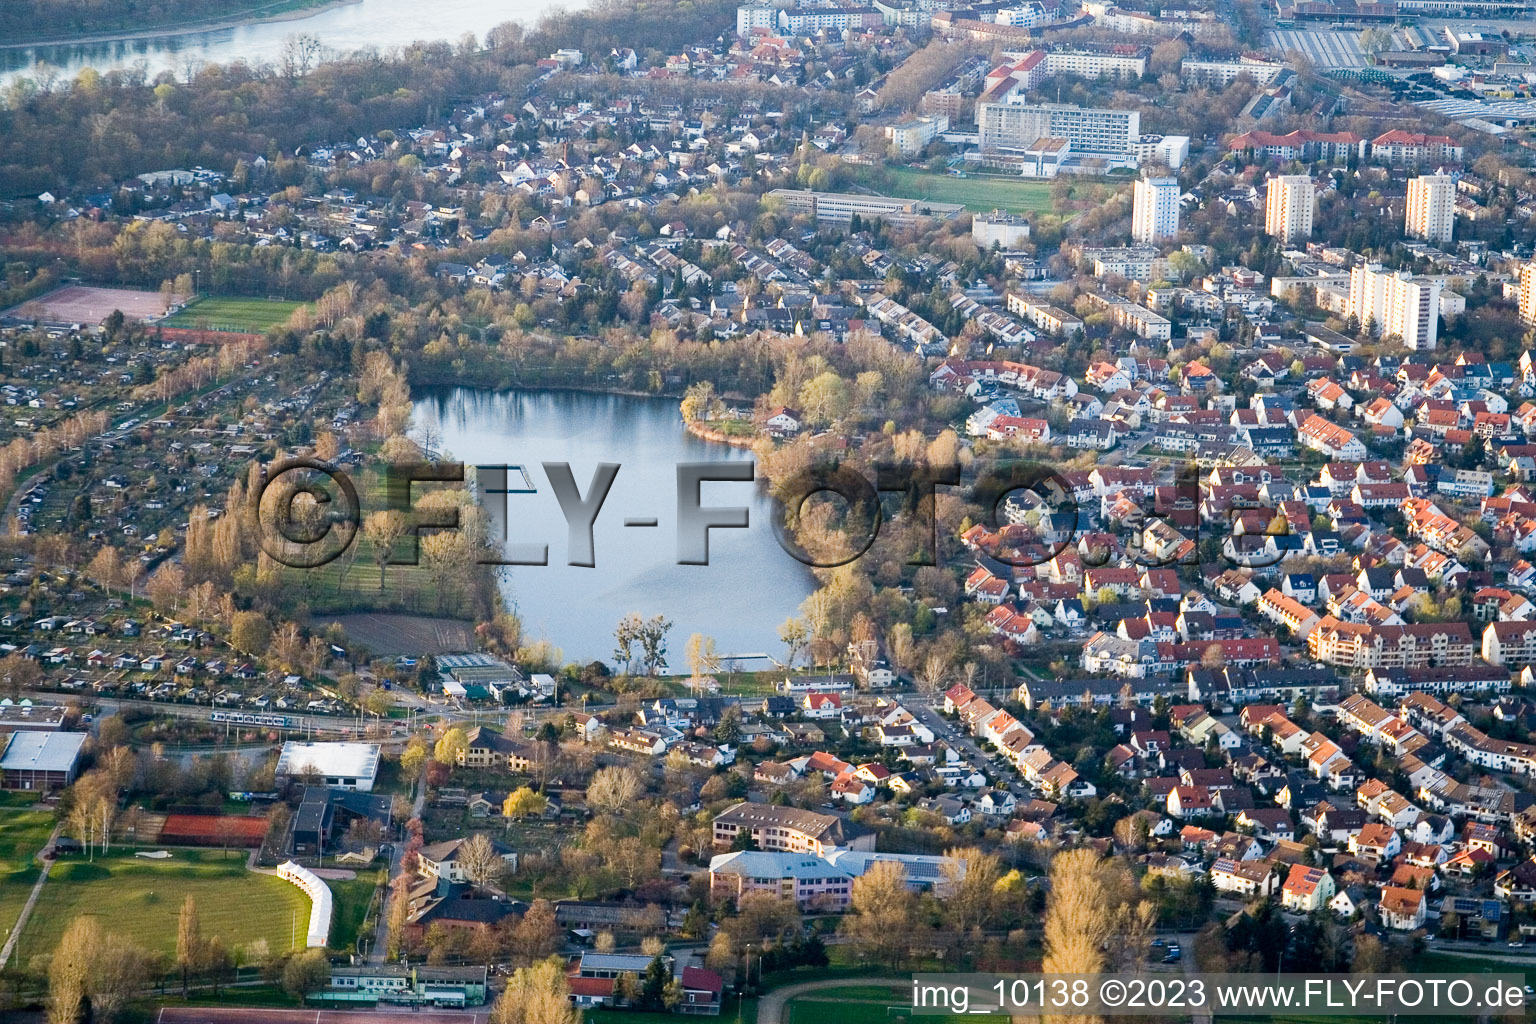 Aerial photograpy of Stollenwörthweier in the district Niederfeld in Mannheim in the state Baden-Wuerttemberg, Germany